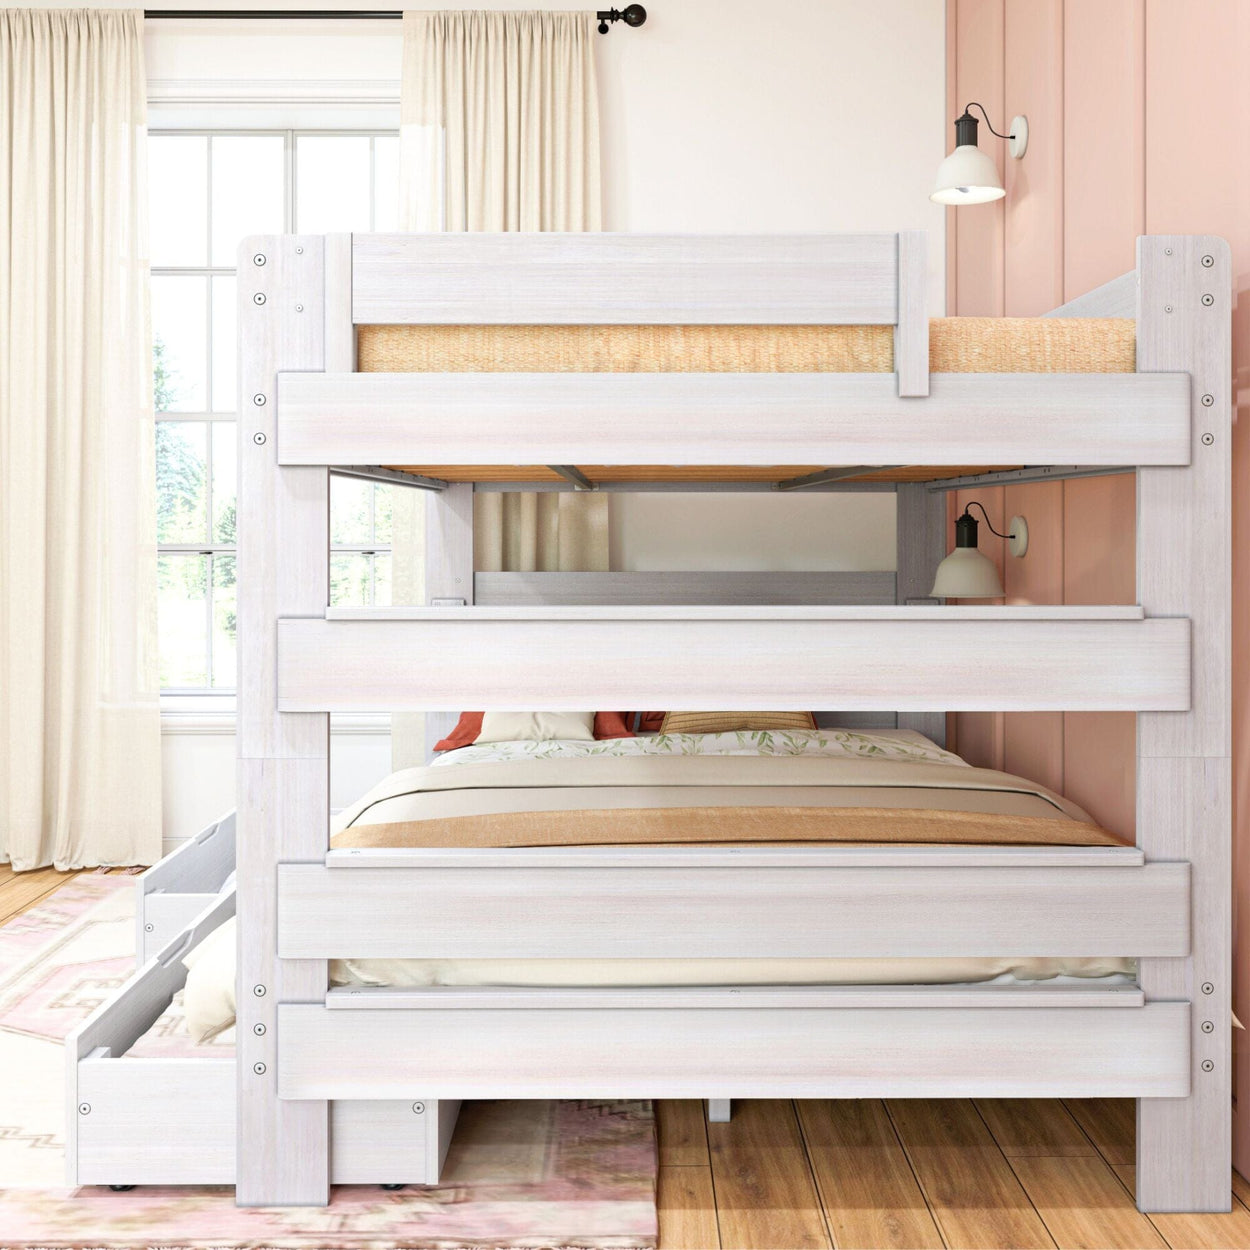 197271-182 : Bunk Beds Farmhouse Queen over Queen Bunk Bed with Storage Drawers, White Wash